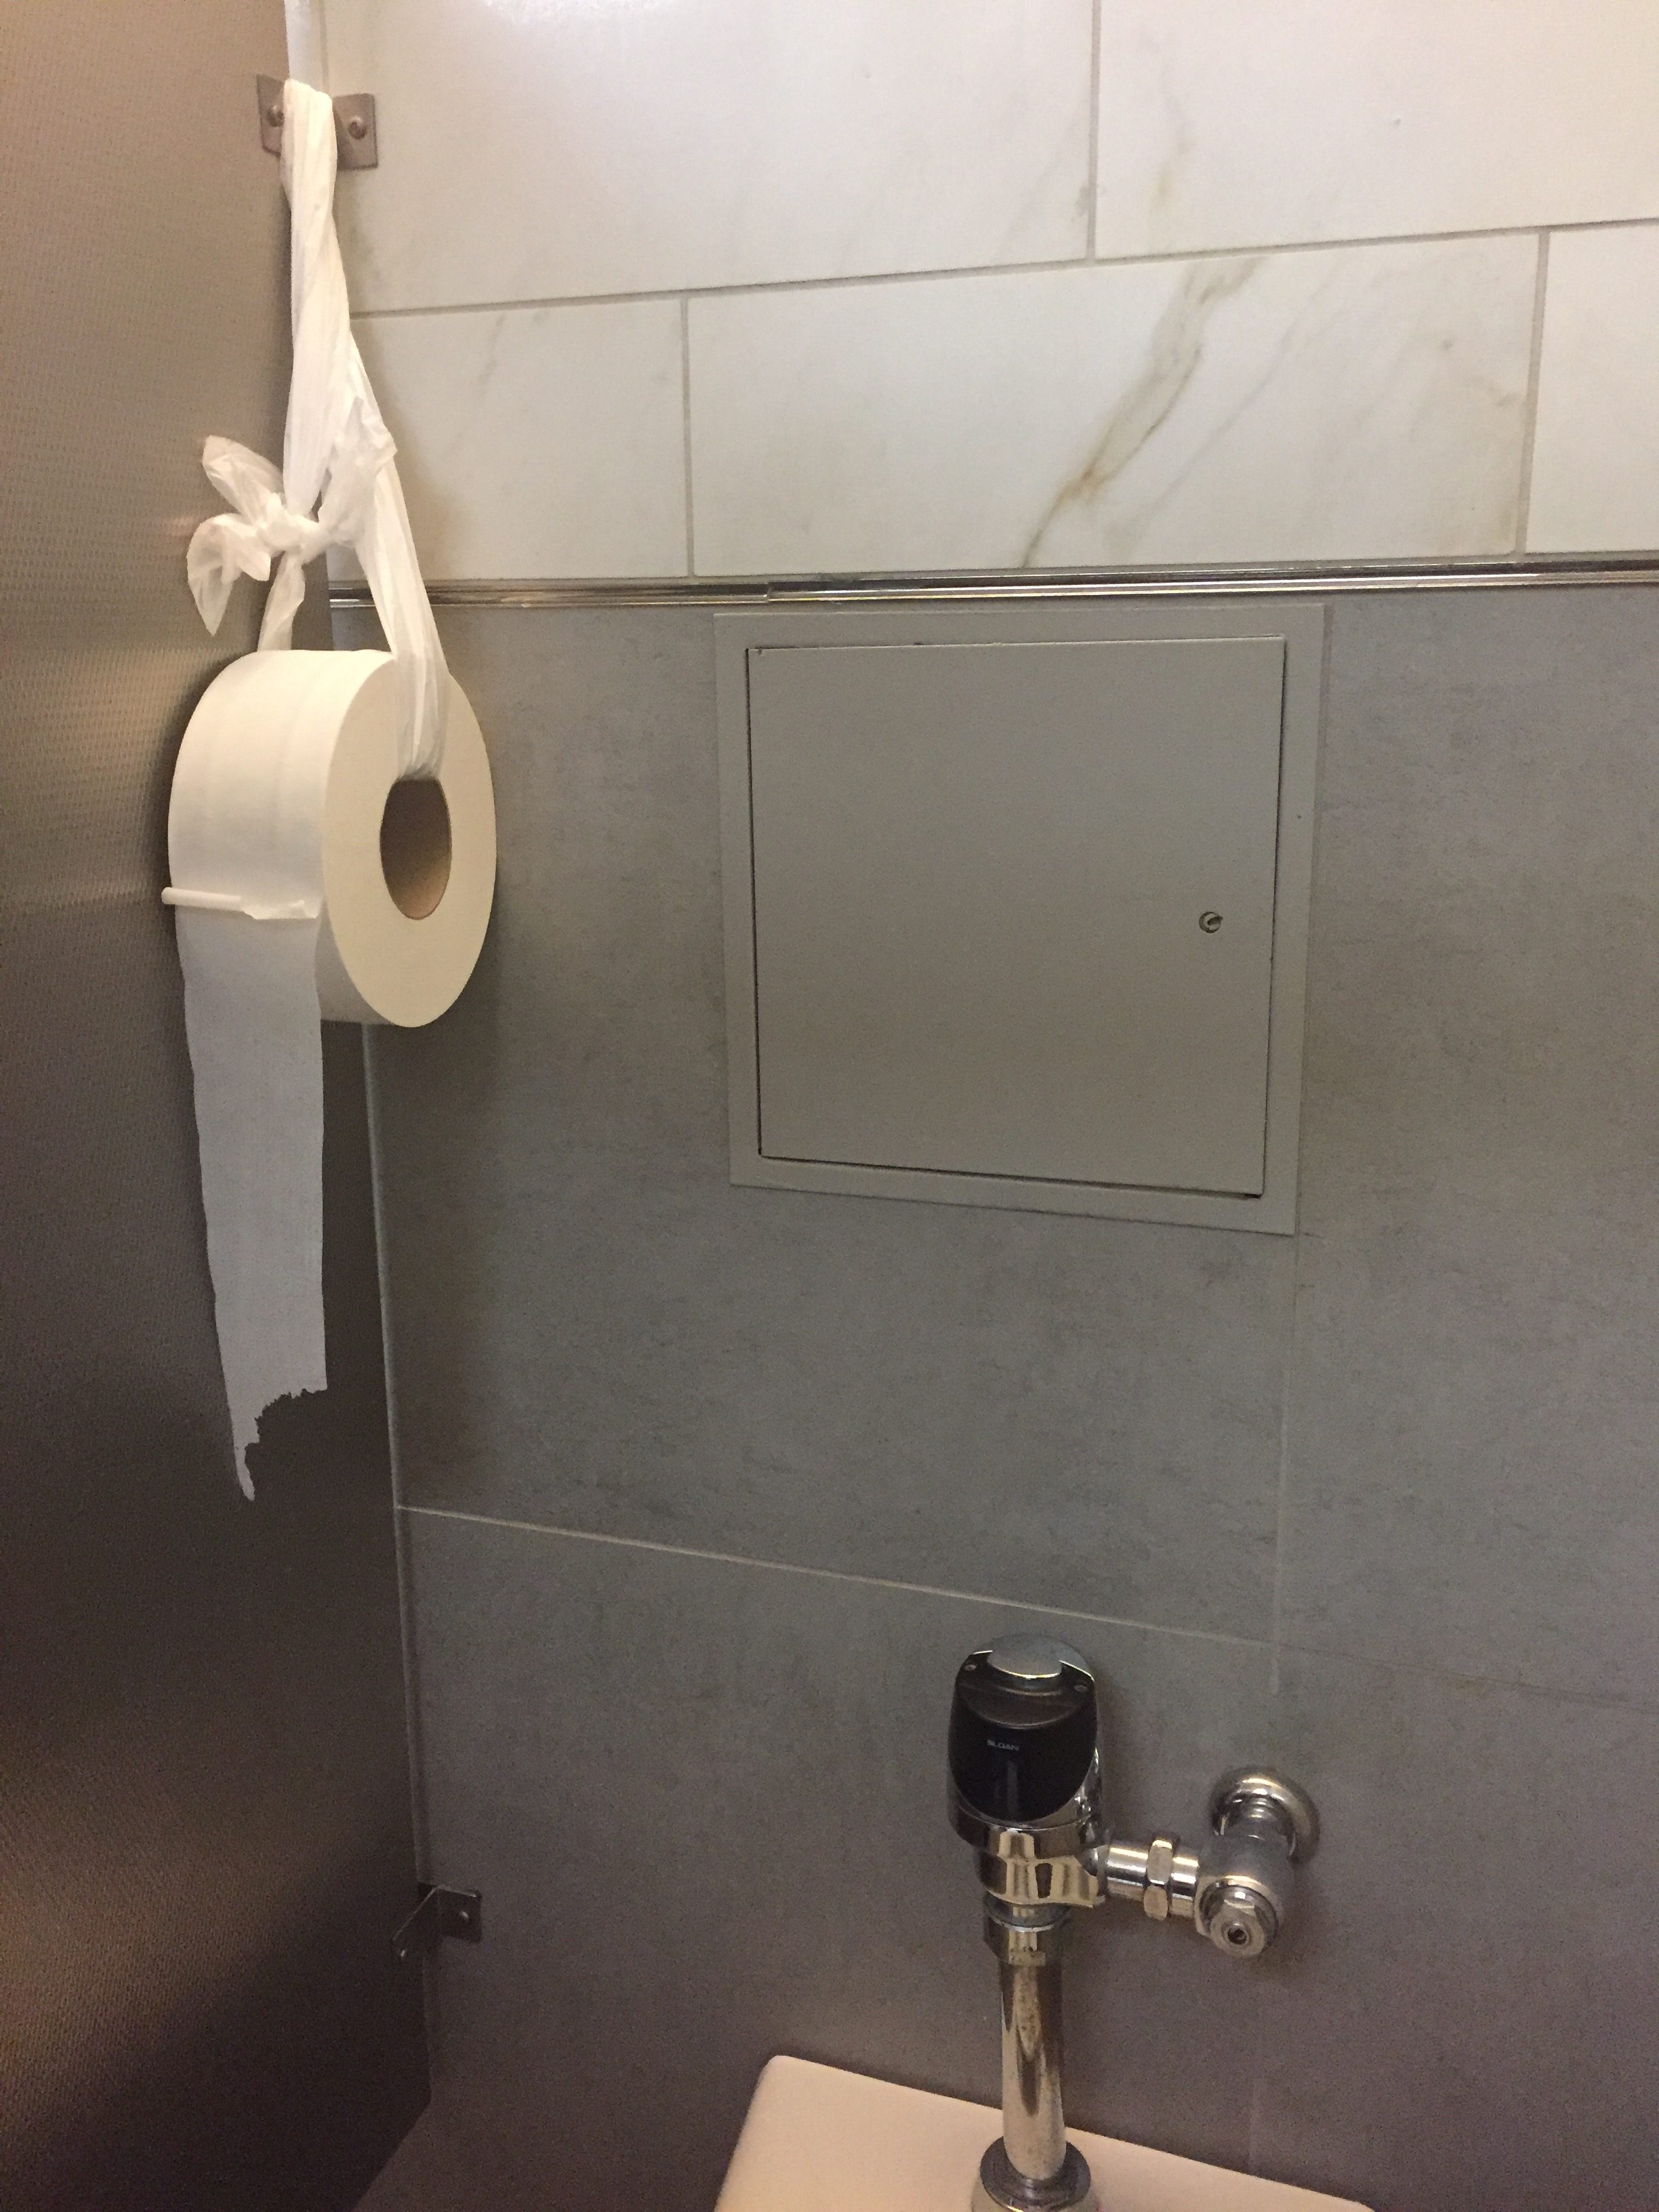 A roll of toilet paper hung up on a hook with a rope.